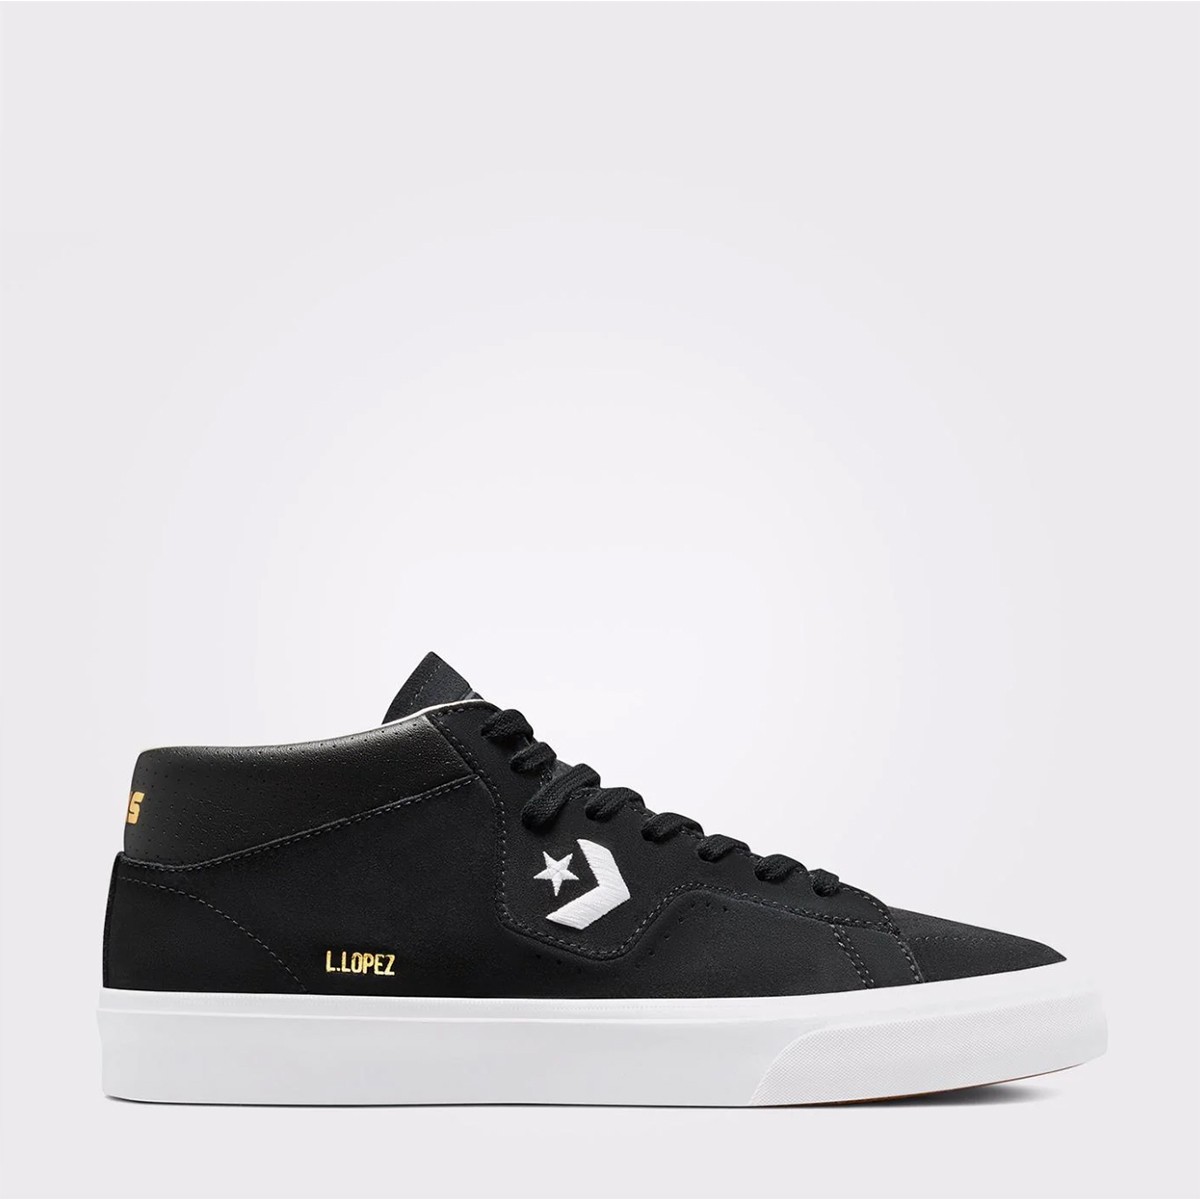 CONVERSE CONS LOUIE LOPEZ PRO SUEDE AND LEATHER - 171331C.001